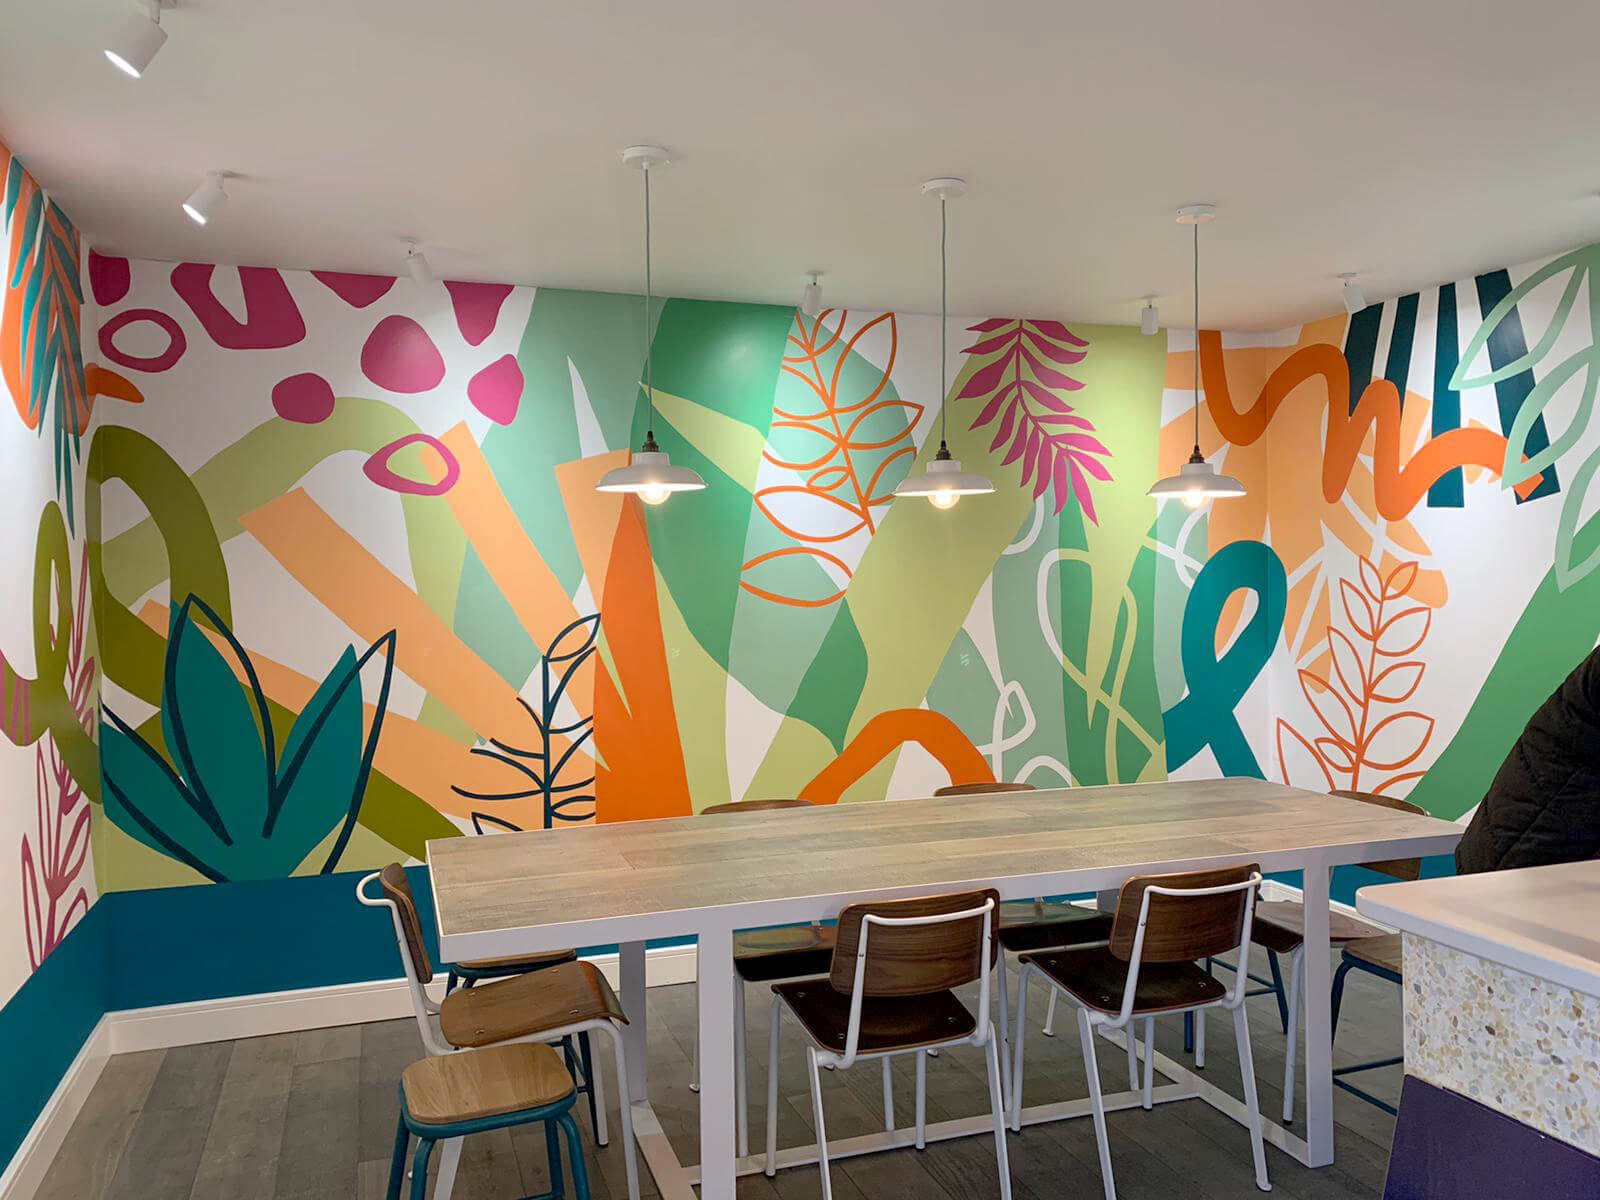 Sophie-Rae-Bakery-Mural-Contemporary-Botanical-abstract-cafe-interior-print-4.jpg